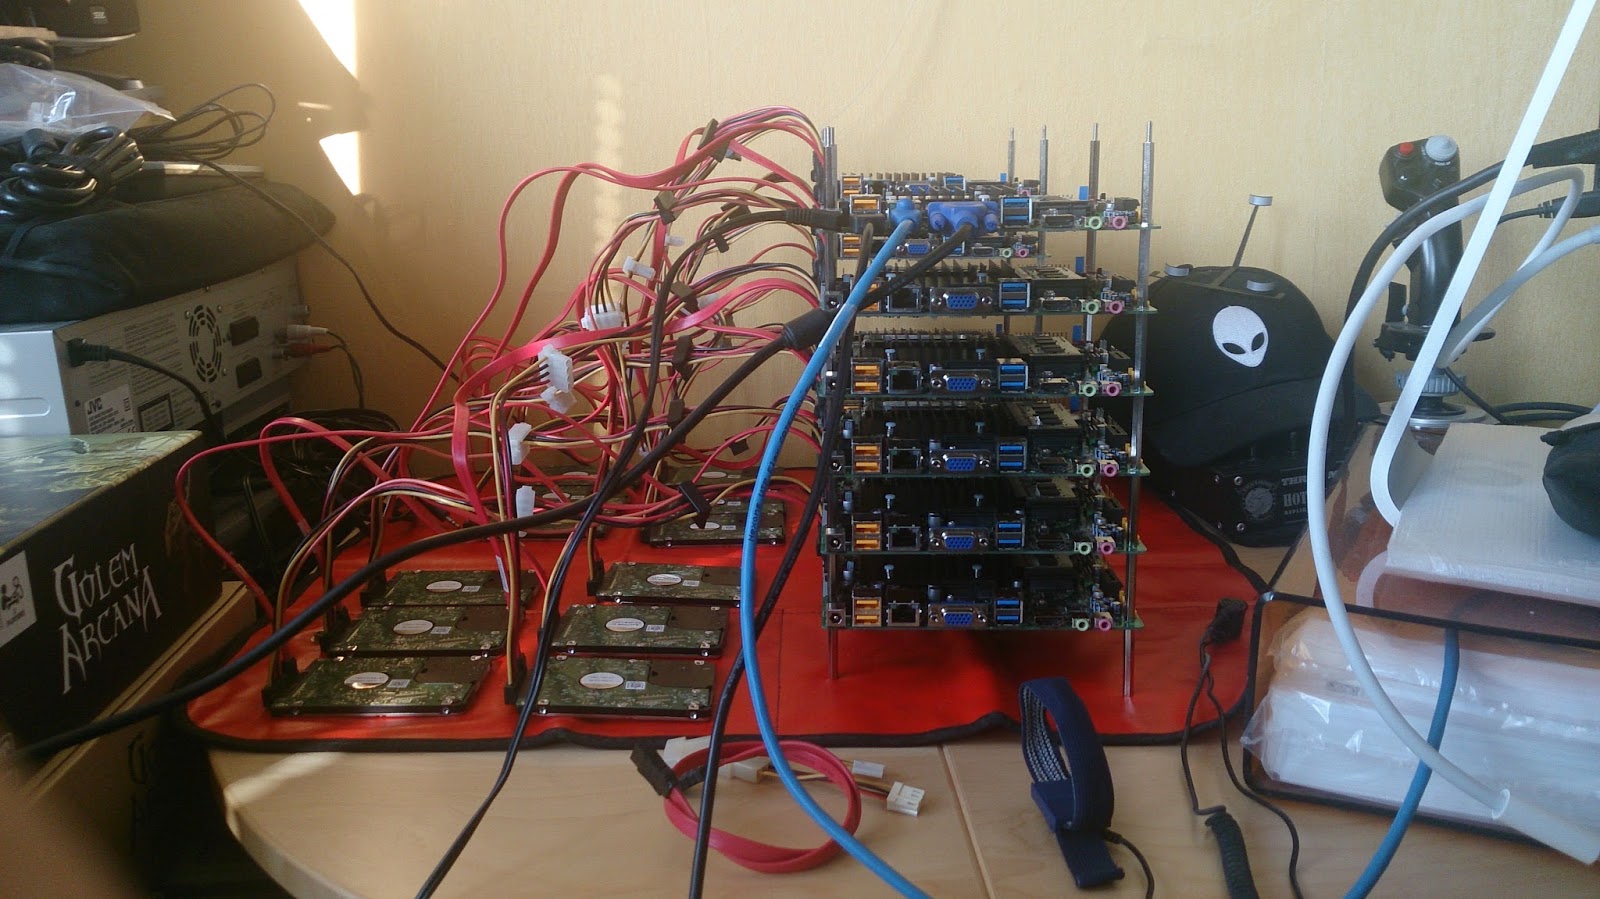 Building a mini cluster – Part 7: Testing the cluster hardware